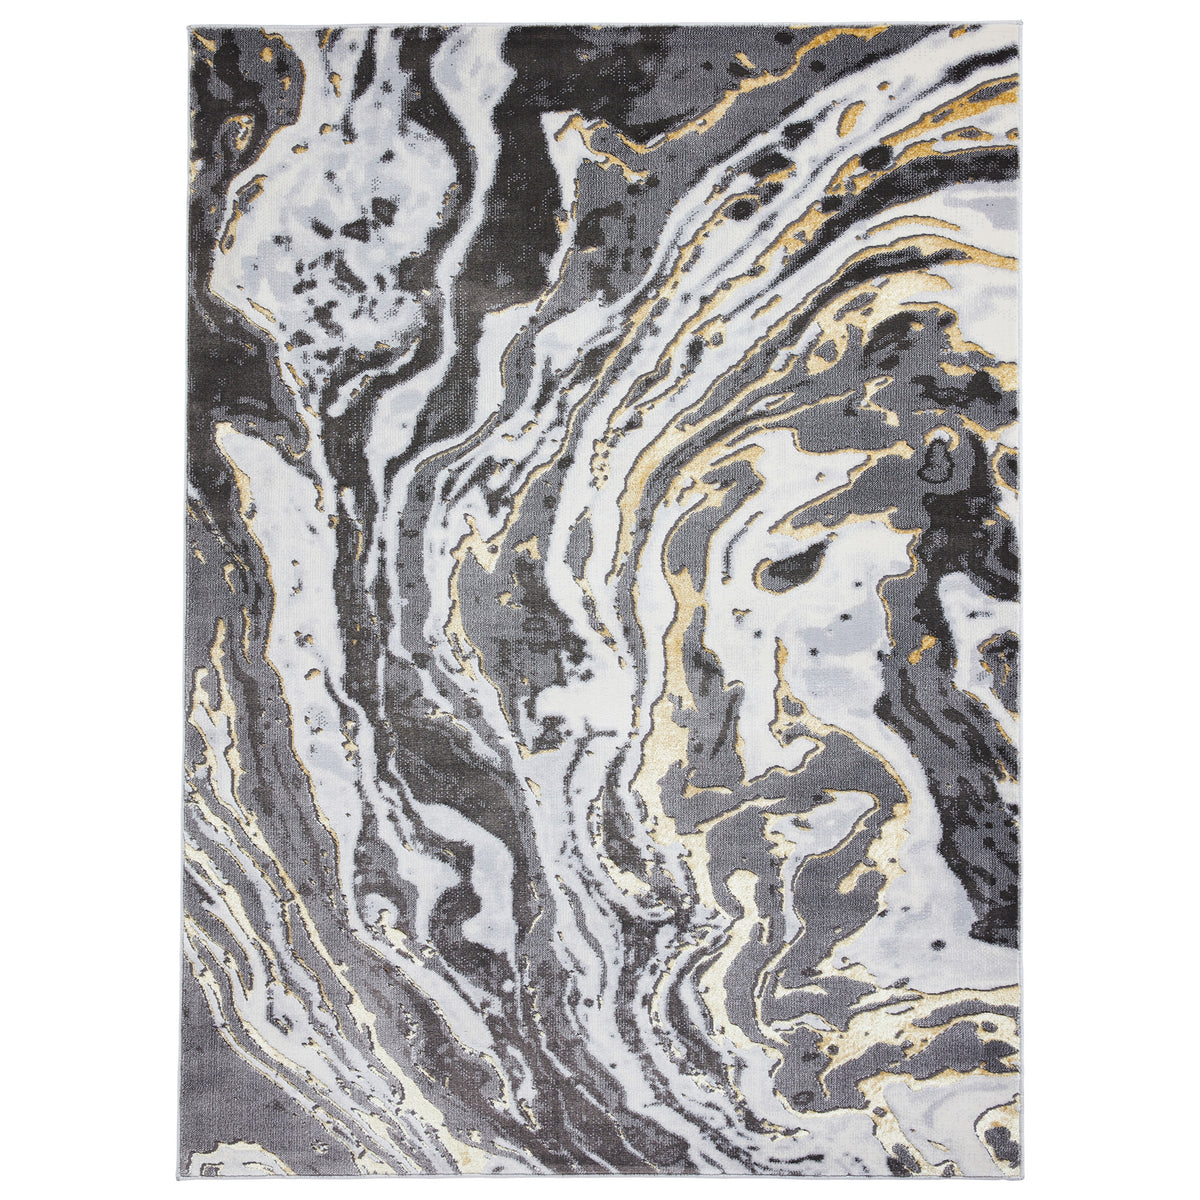 Aldrin Grey gold Marble Swirl Rug from Roseland furniture